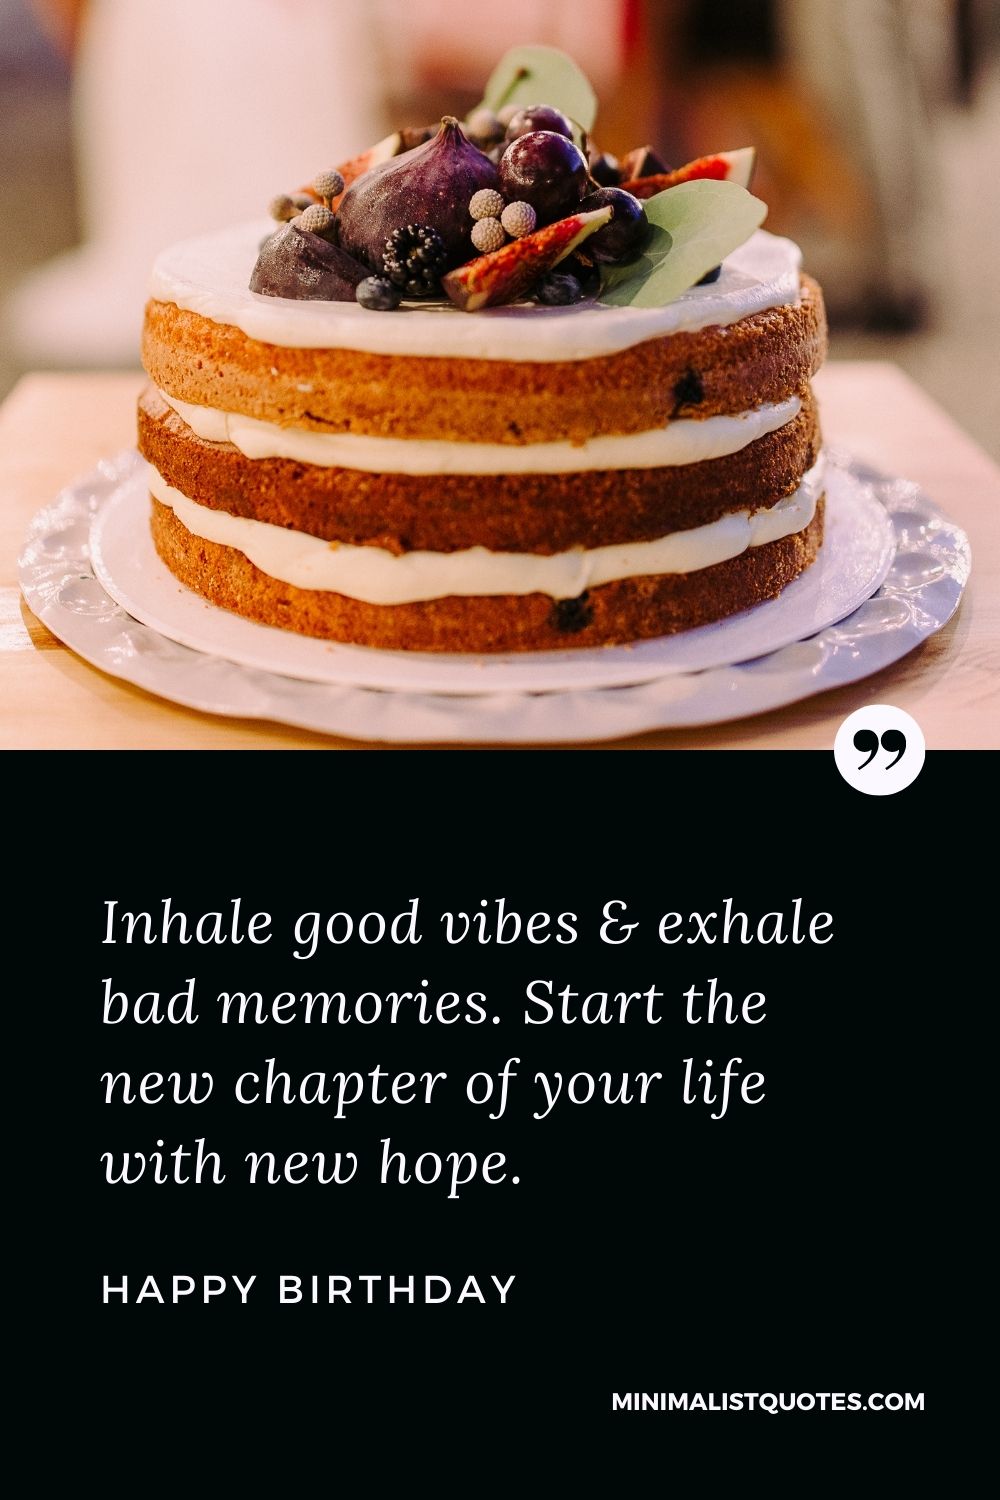 Happy Birthday Wishes - Inhale good vibes & exhale bad memories. Start the new chapter of your life with new hope.